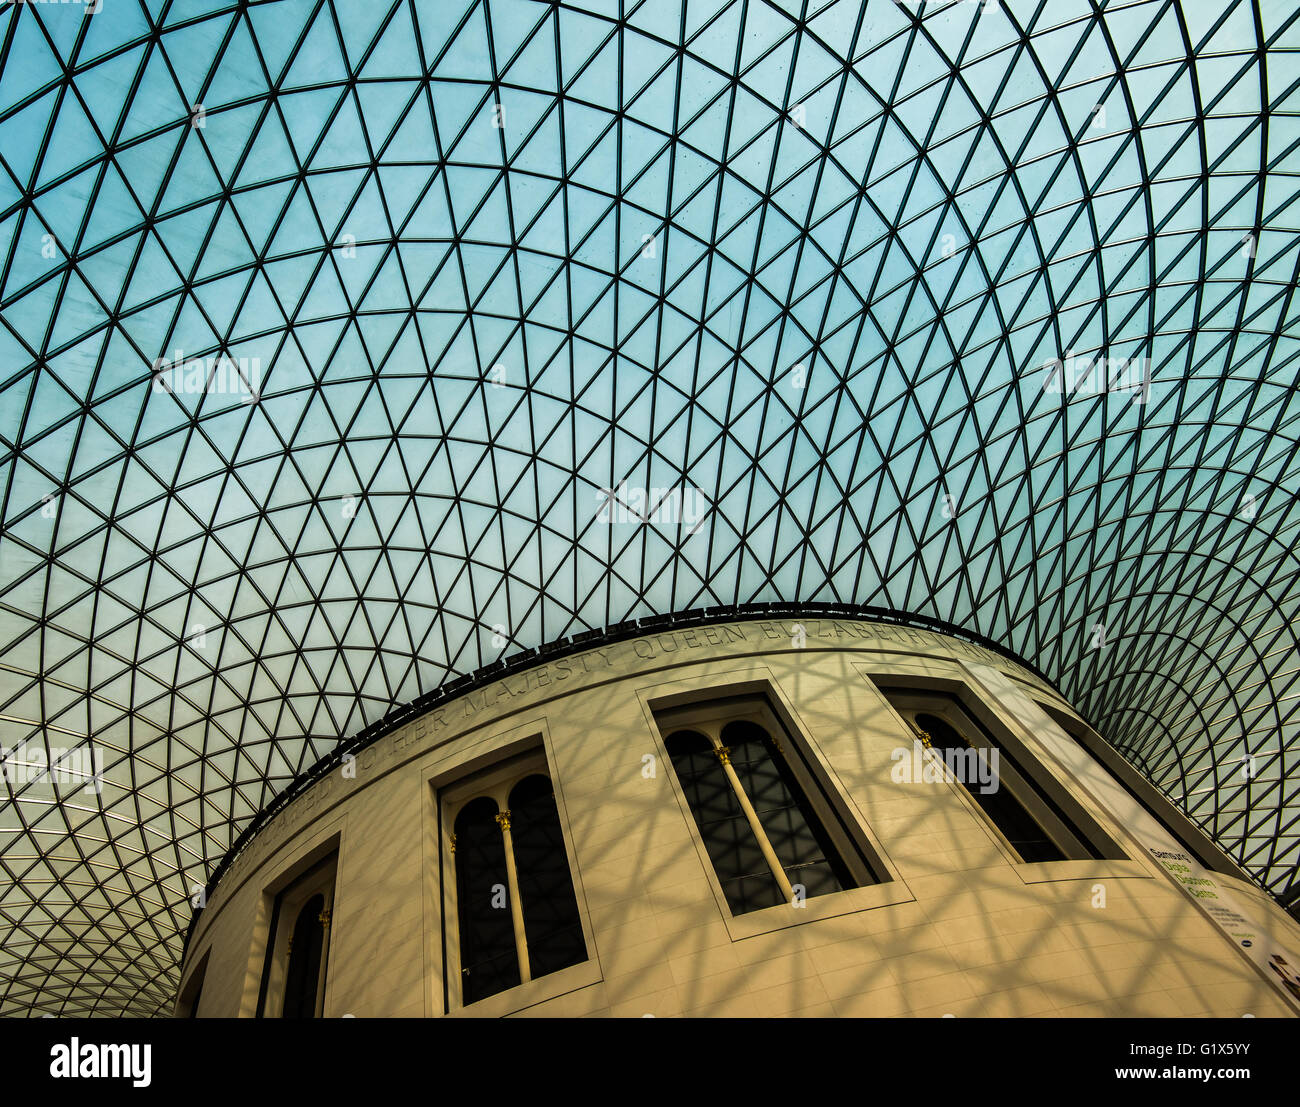 Architectural roof of British Museum London Stock Photo - Alamy